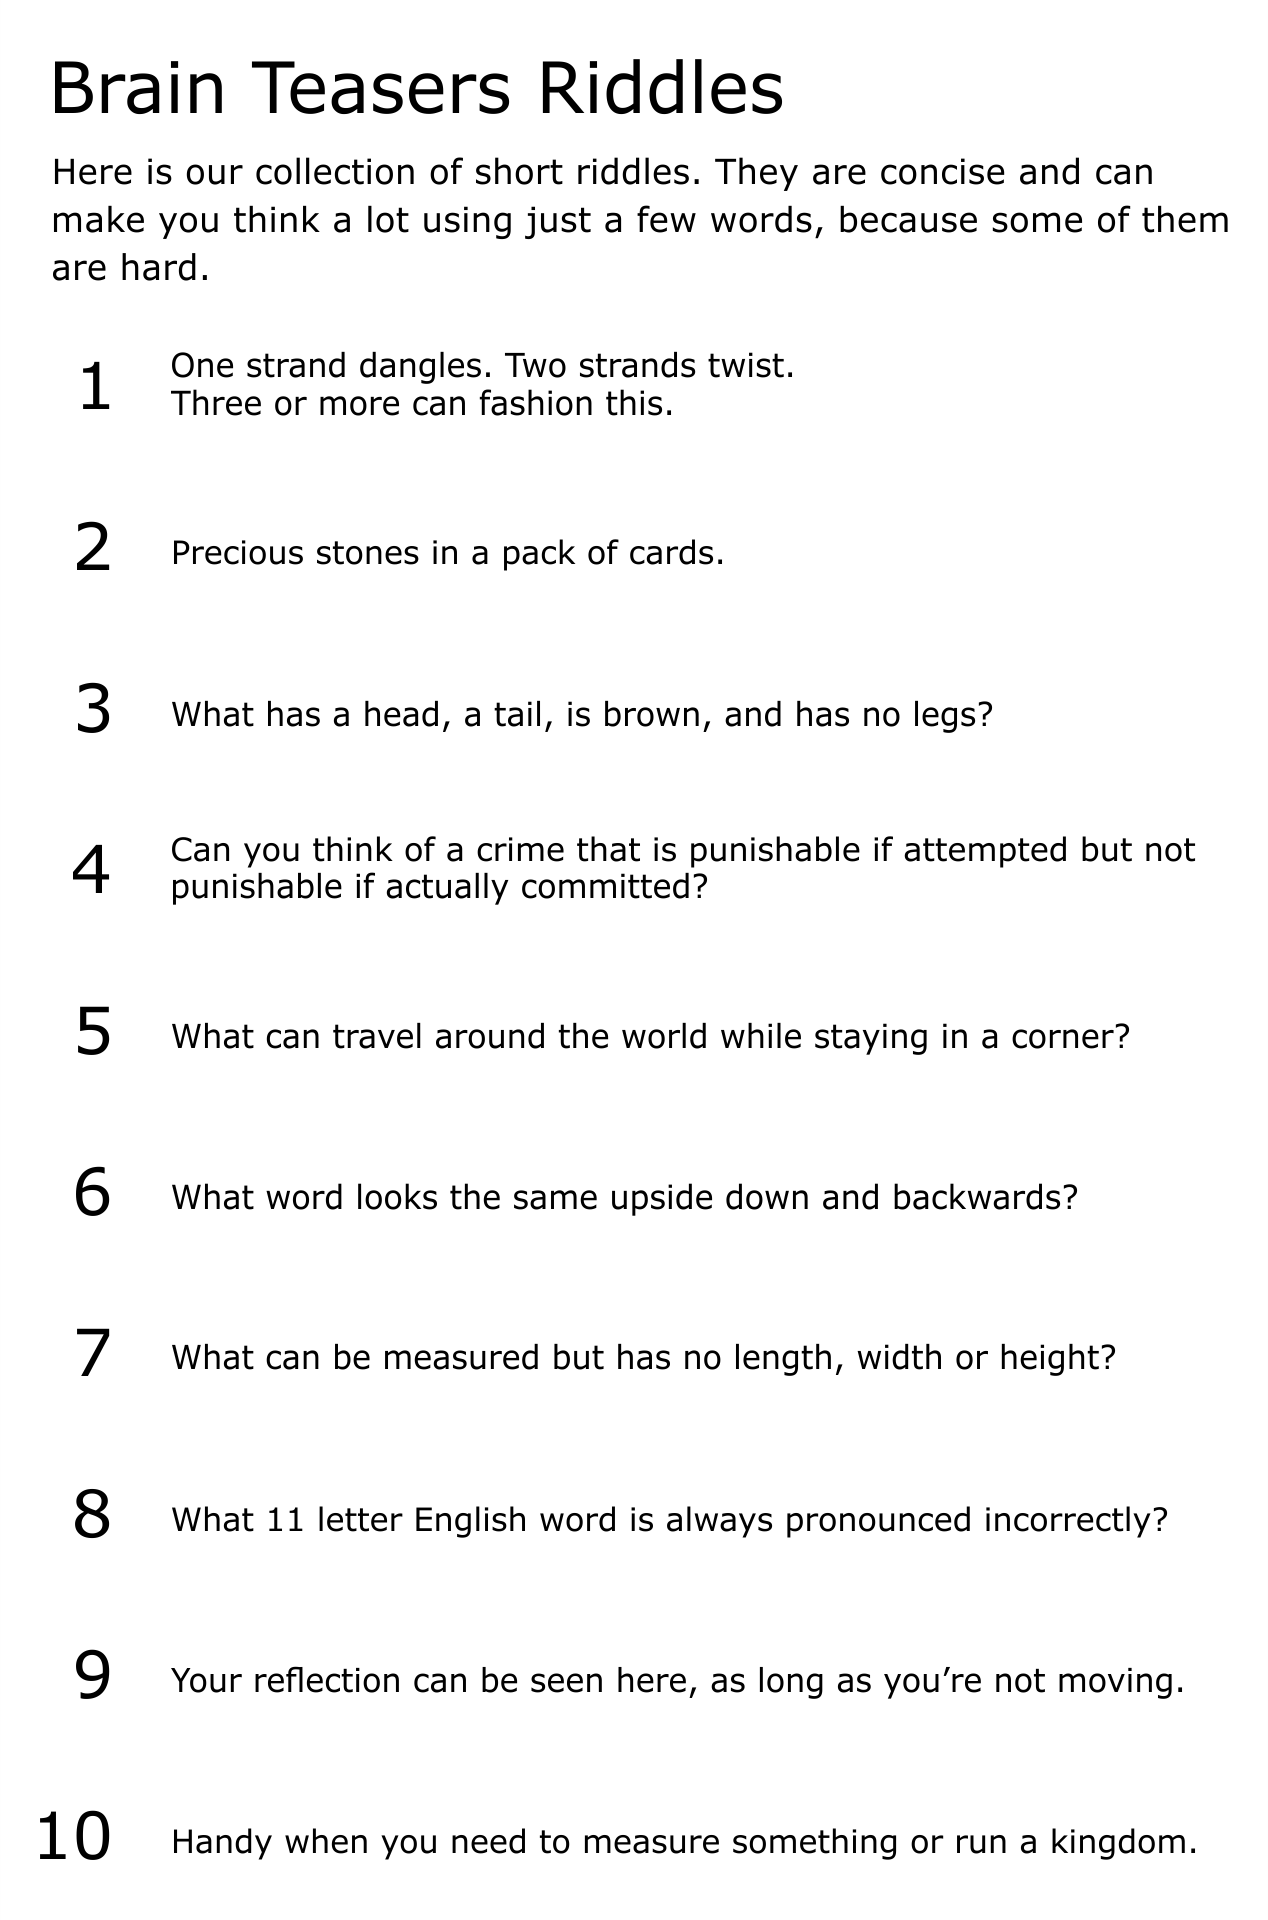 English Riddles And Brain Teasers 2 Esl Worksheet By